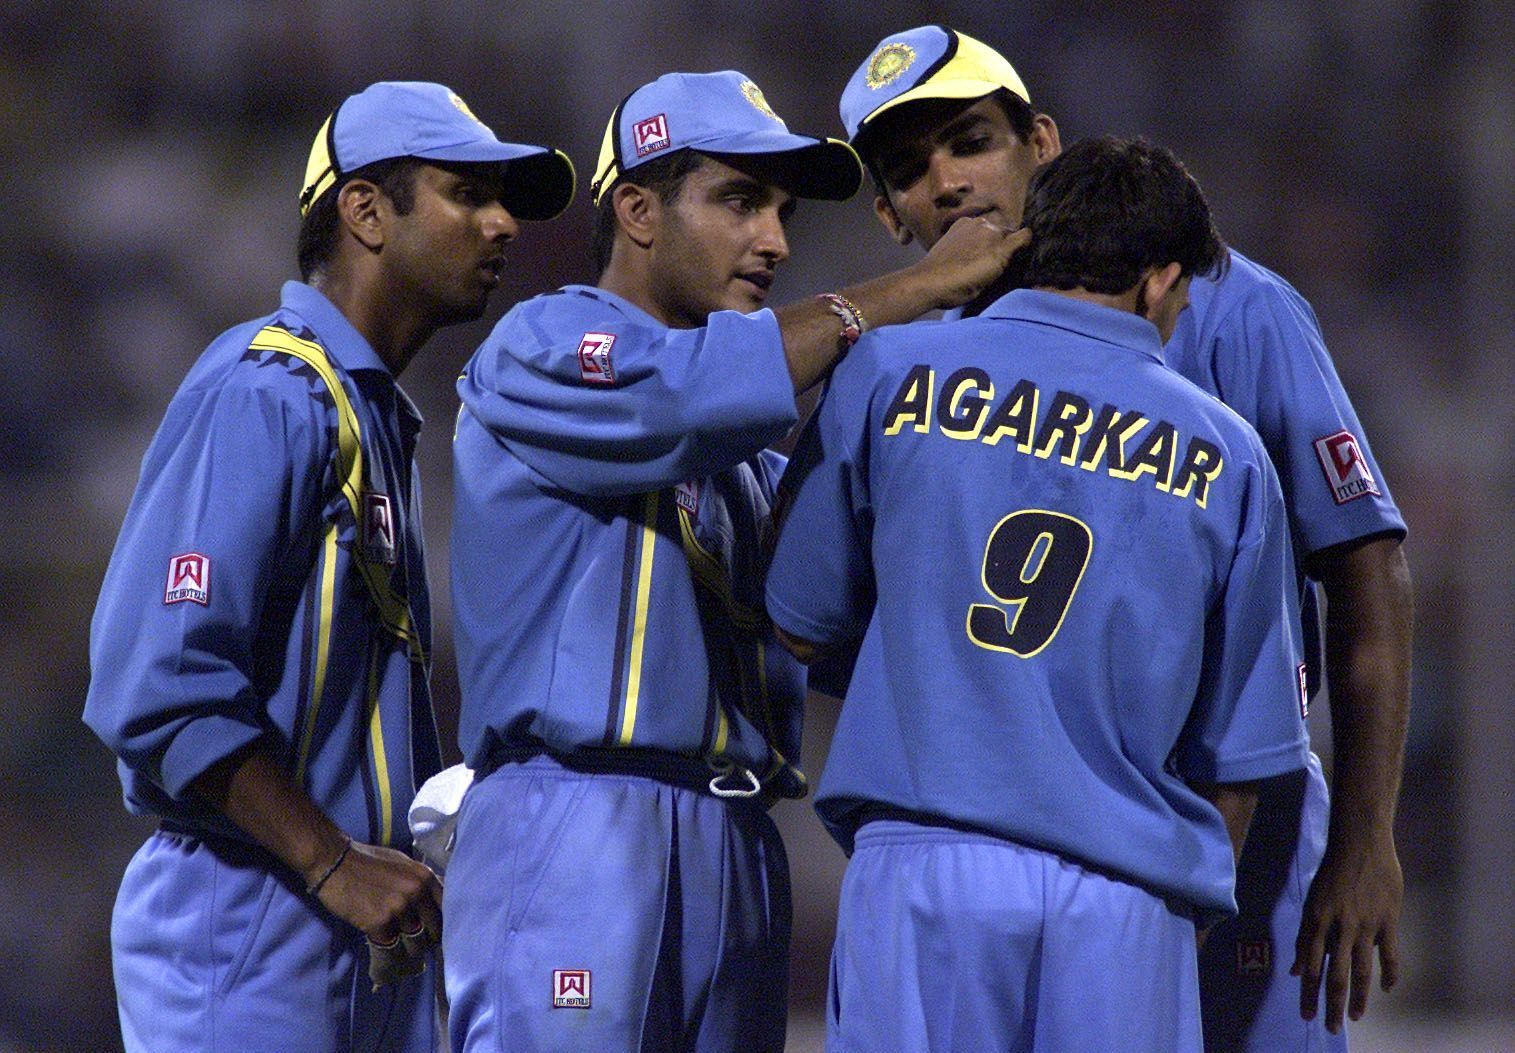 Agarkar was quite important in ODIs.